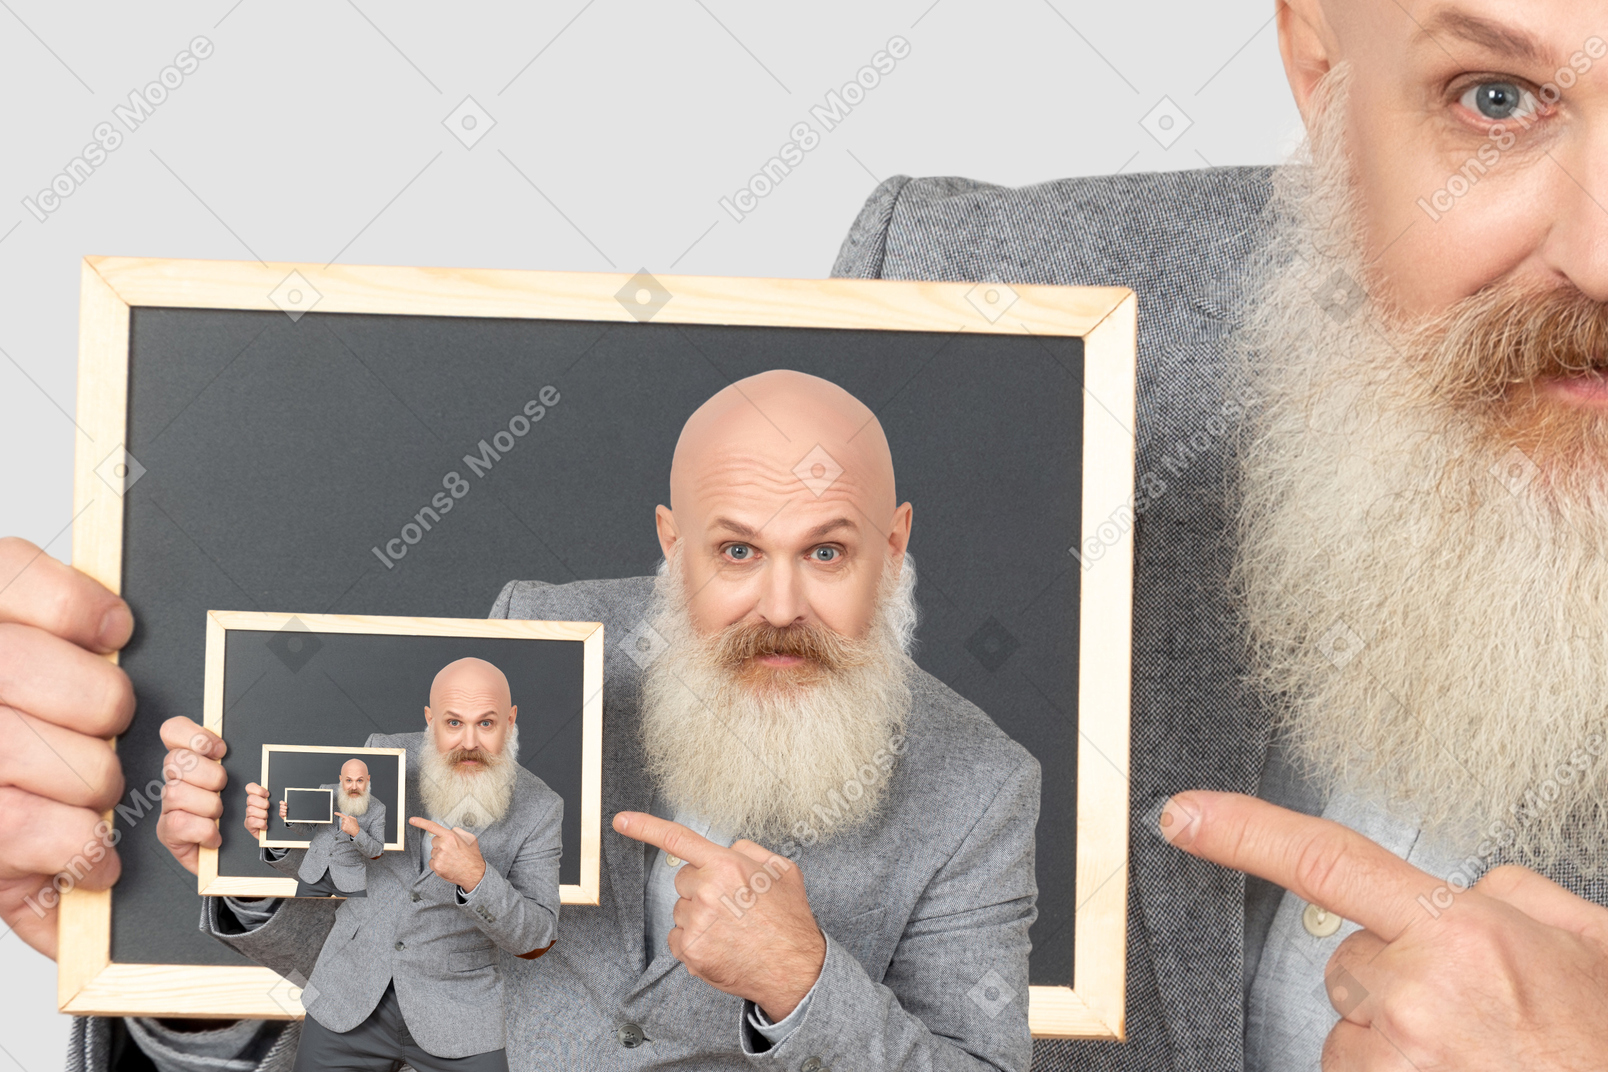 Repeating image of a man pointing at a photo of himself